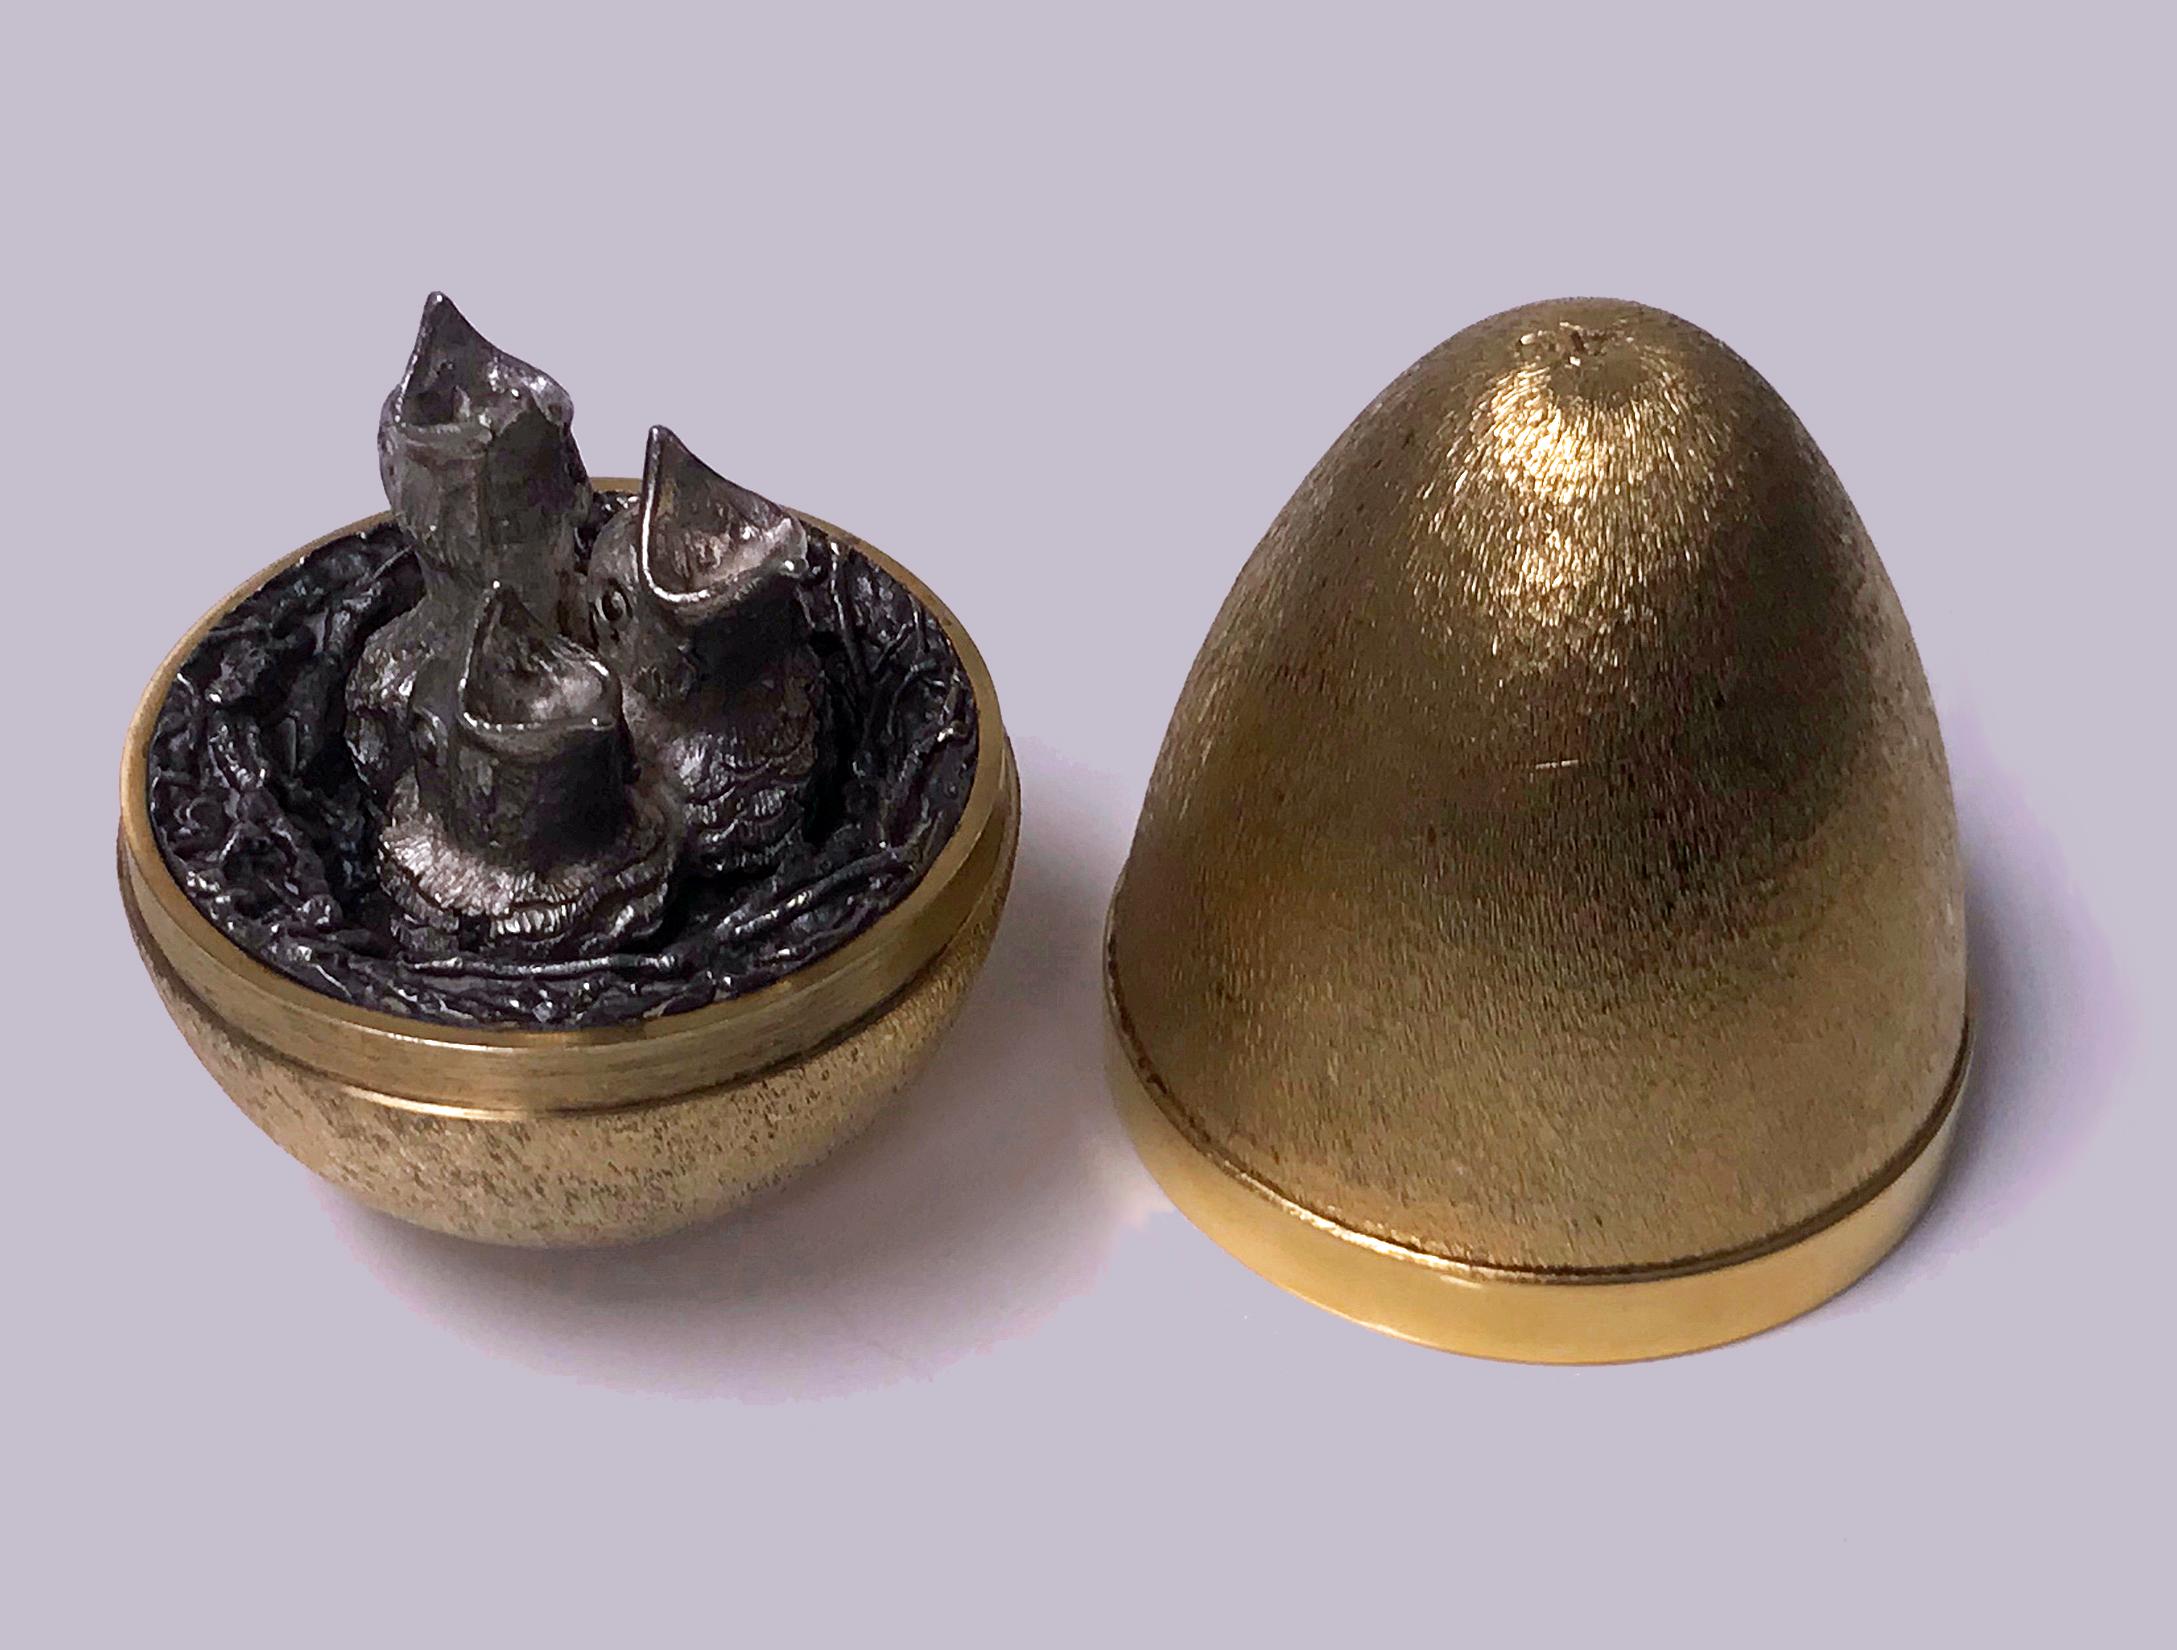 Stuart Devlin silver gilt surprise egg, London 1973, opening to reveal three hatchlings (chicks) in a nest. Original box and papers. Height: 7.5cm high, No 56 of limited edition of 100. Item weight: 162 grams.